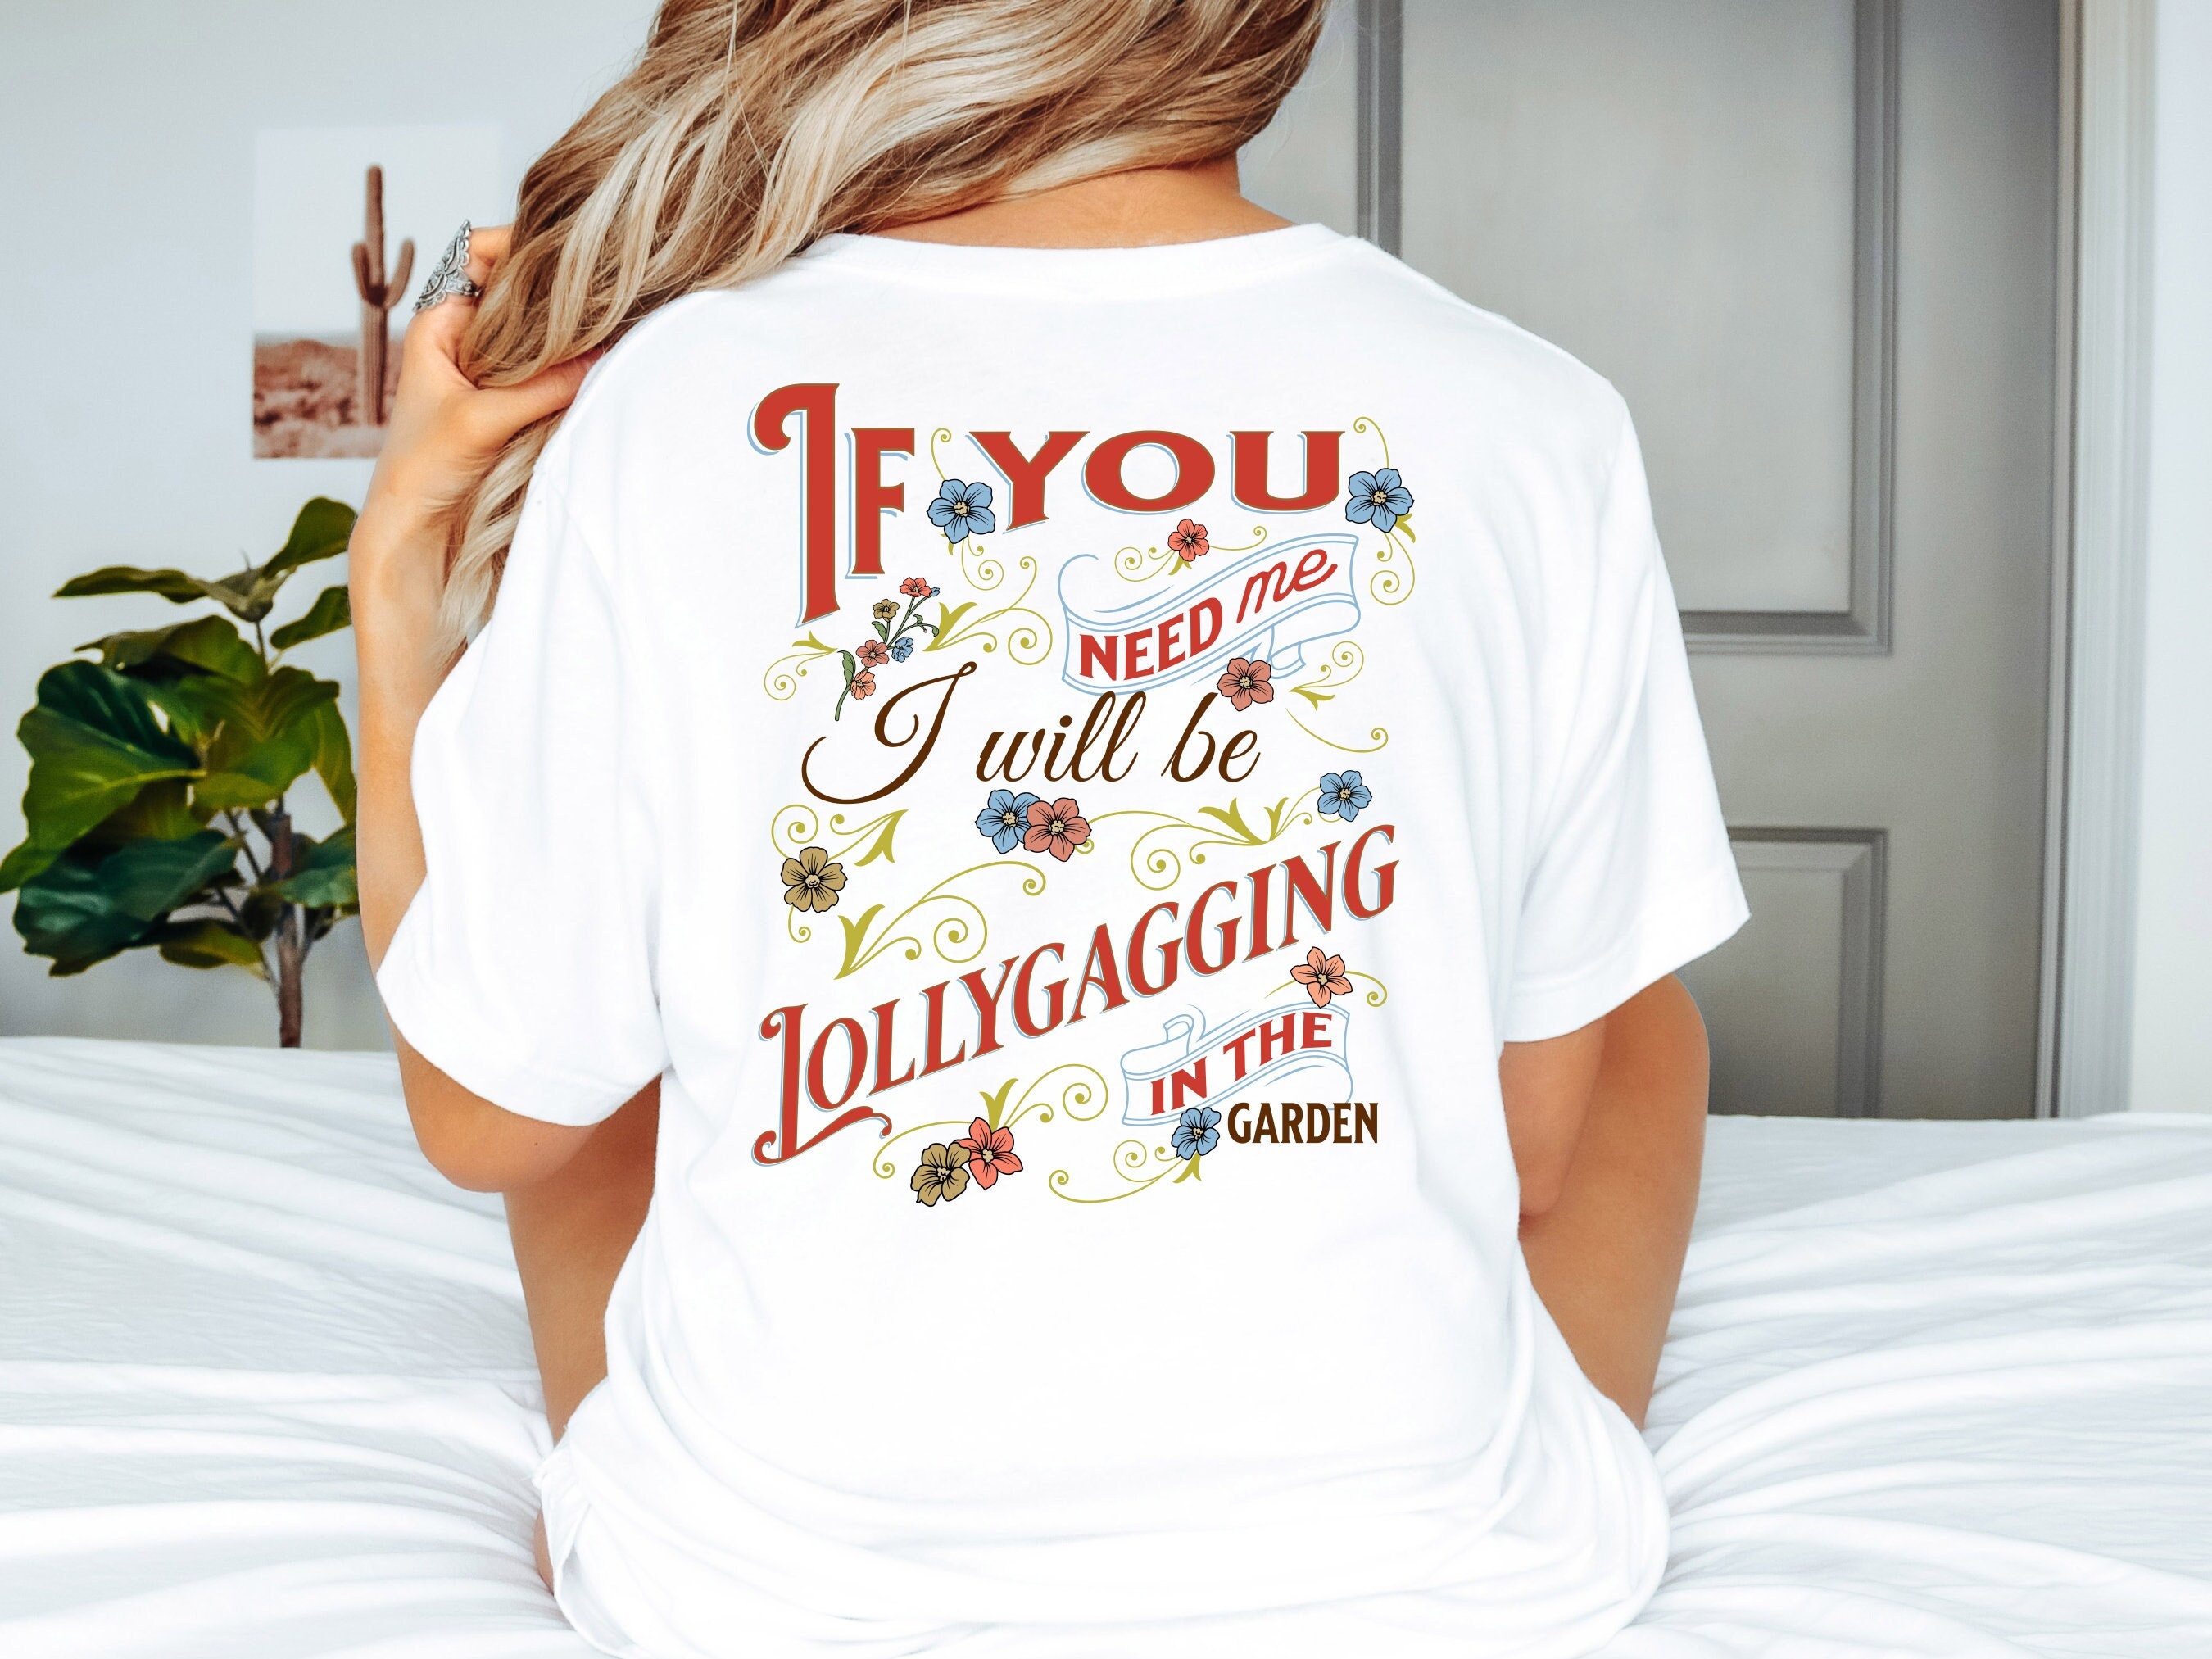 Lollygagging Gifts & Merchandise for Sale